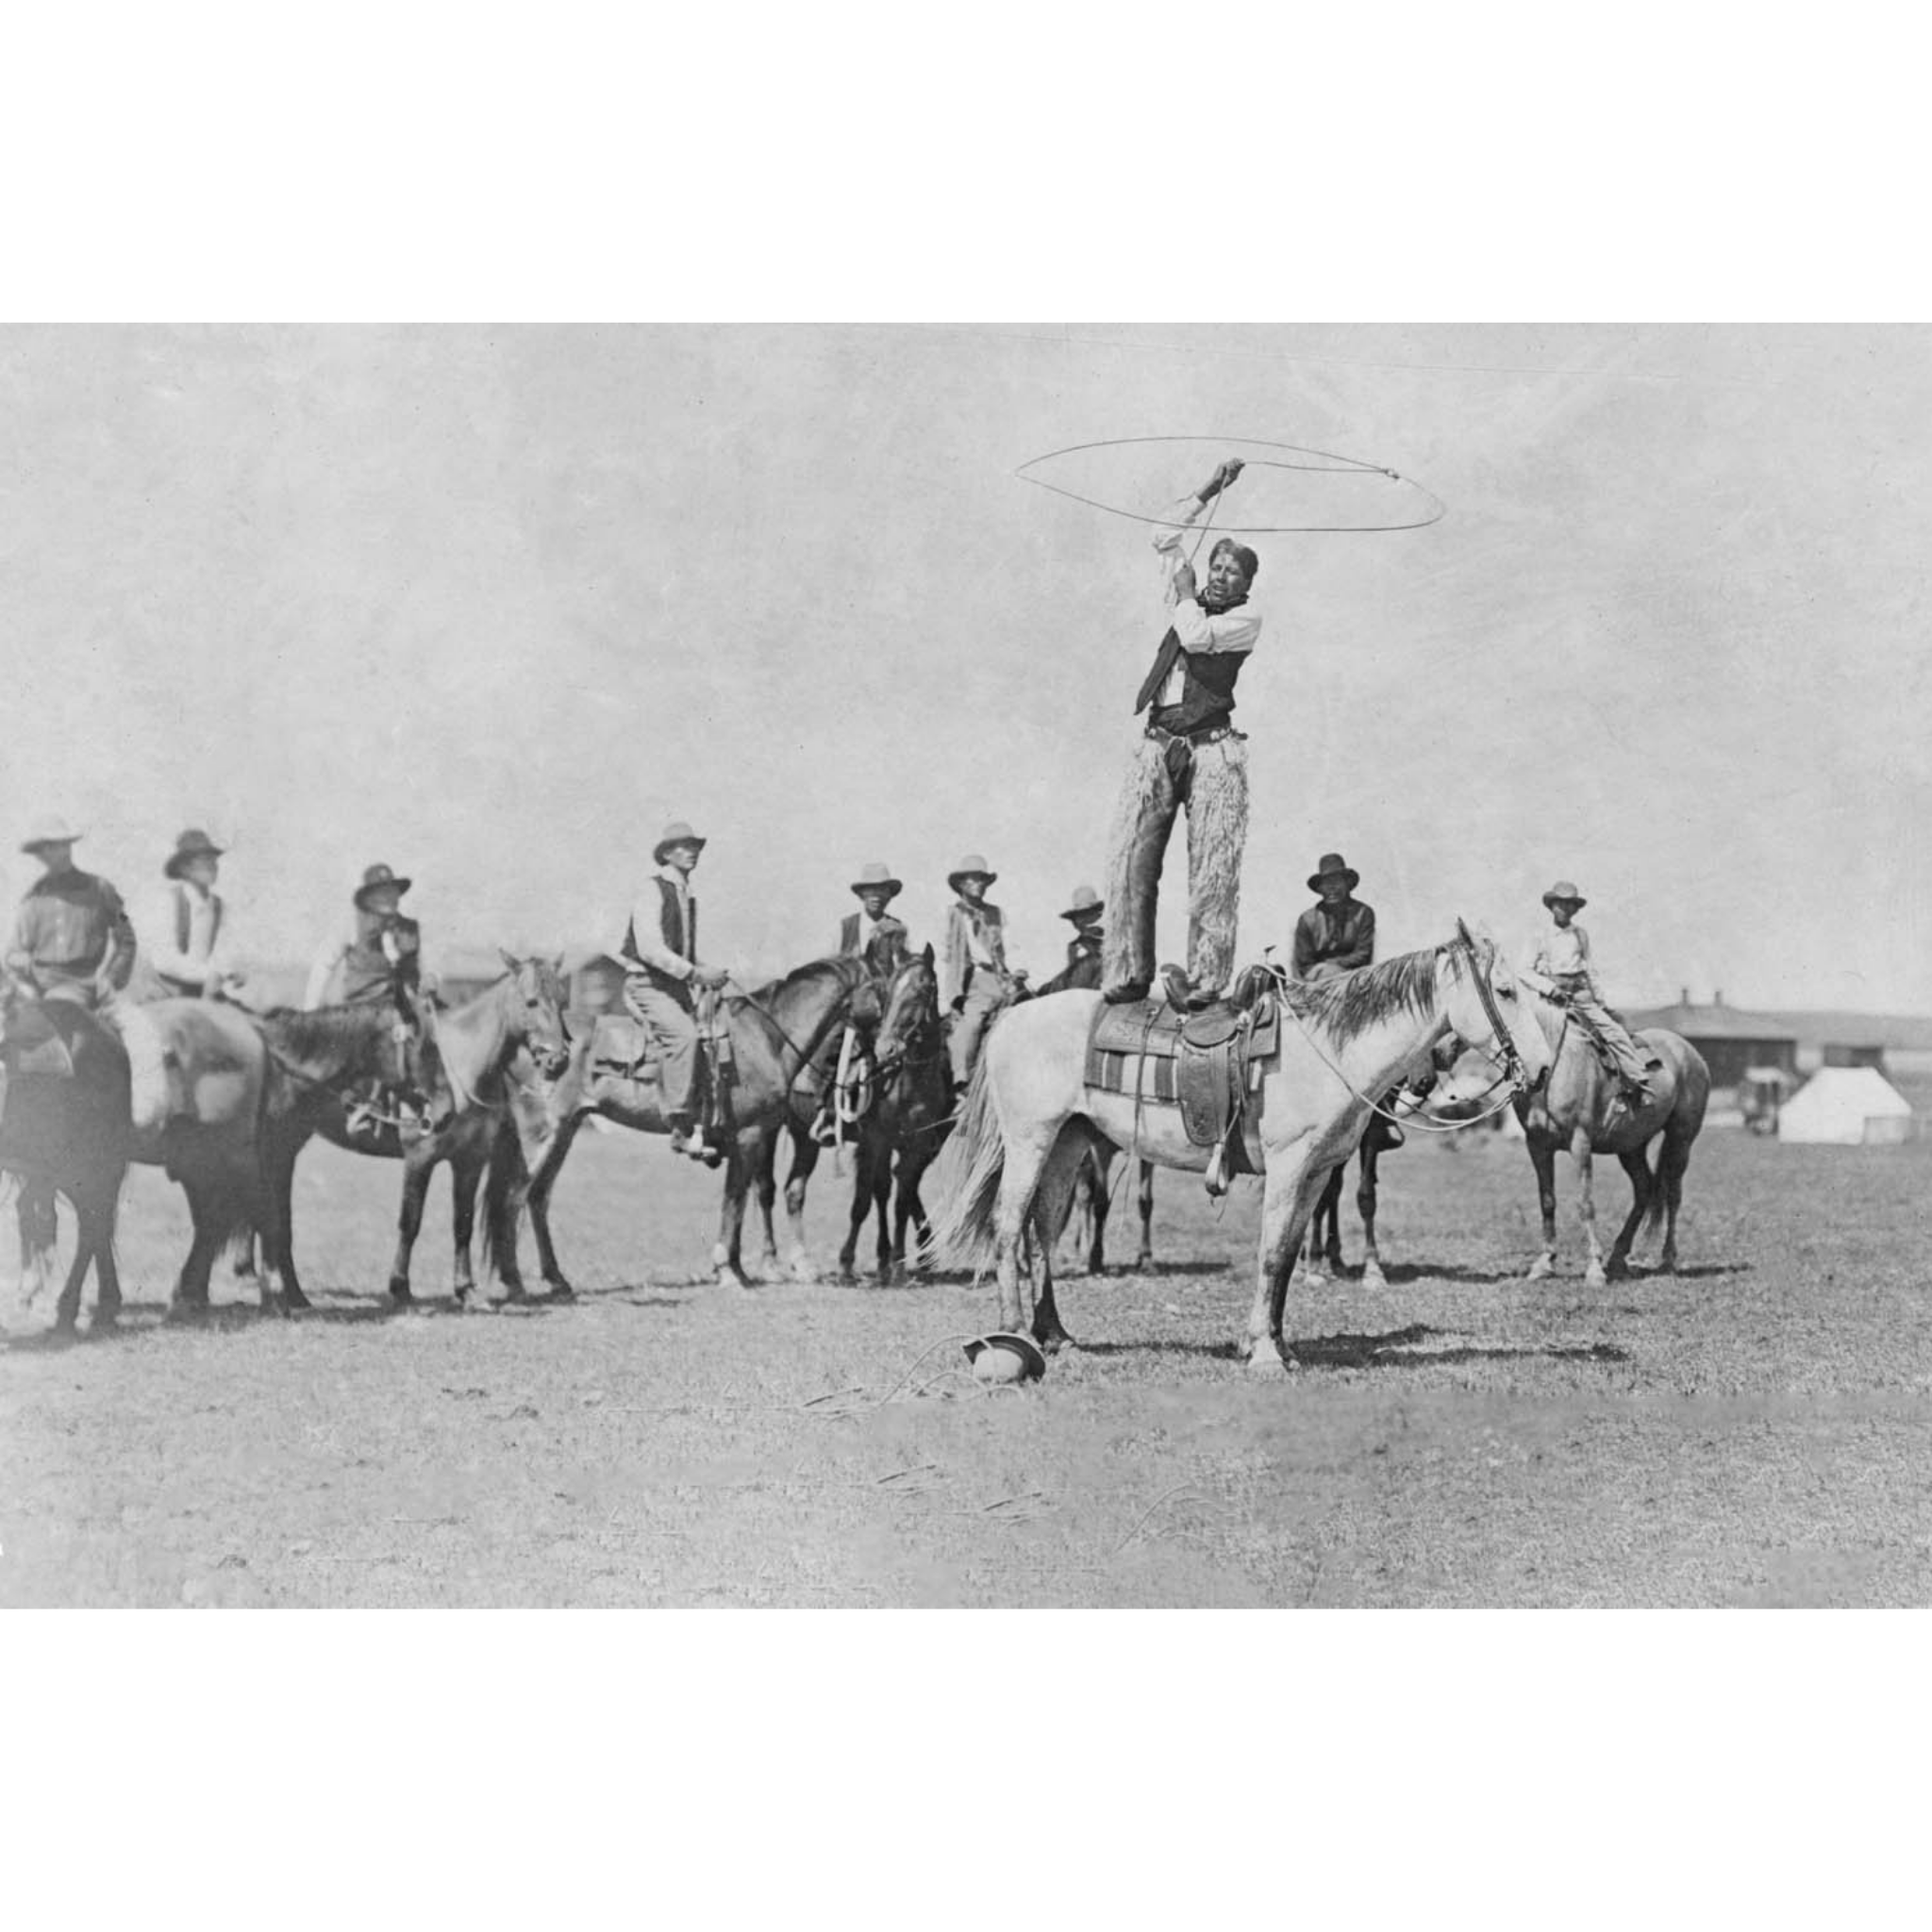 Rodeo Cowboys 14 - Twirling Rope on Horse - ca. 1916 Photograph